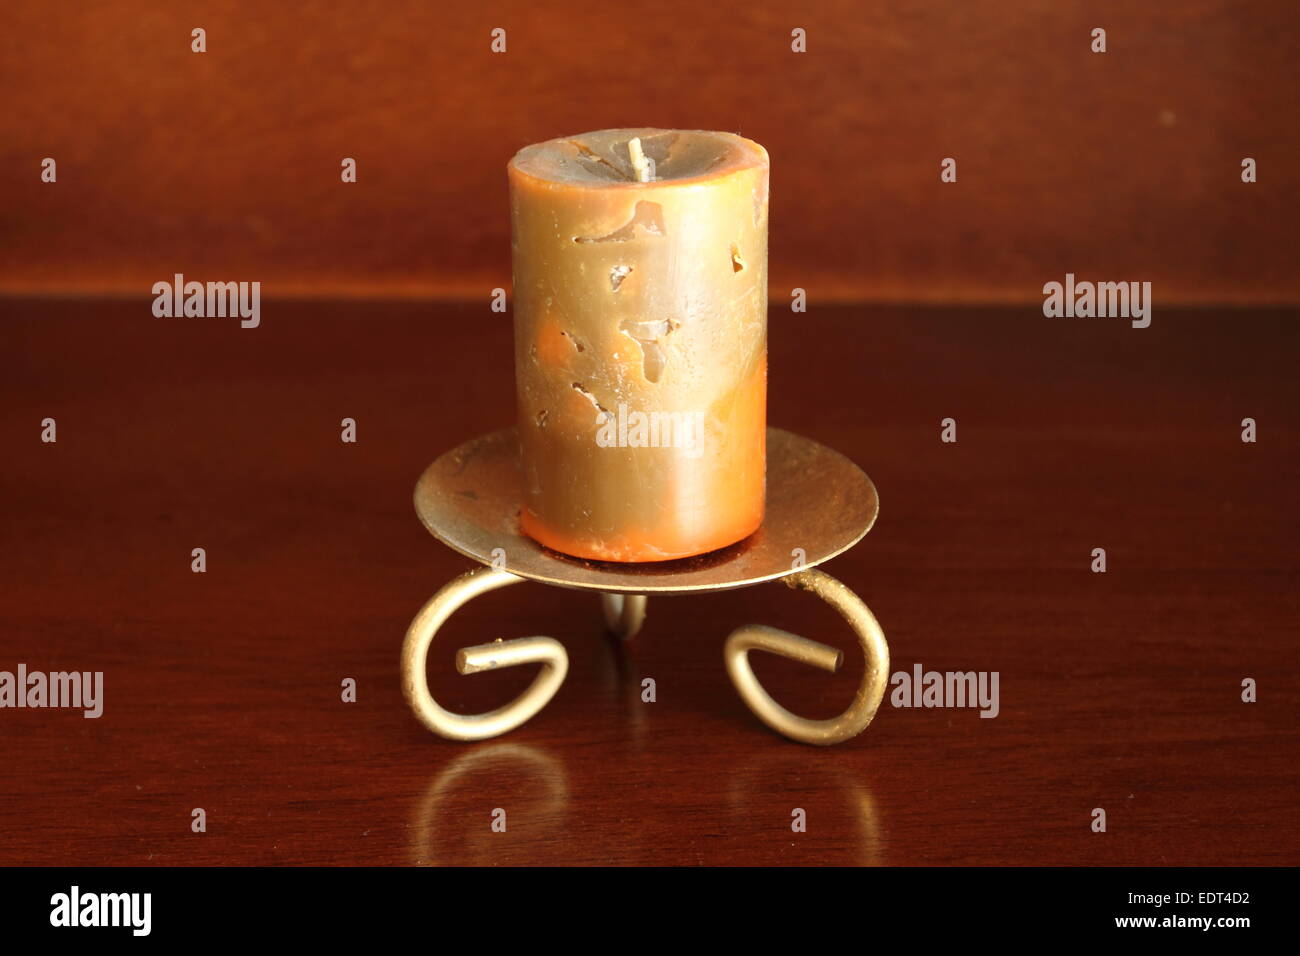 Artistic candle on a gold candleholder over a brown background Stock Photo